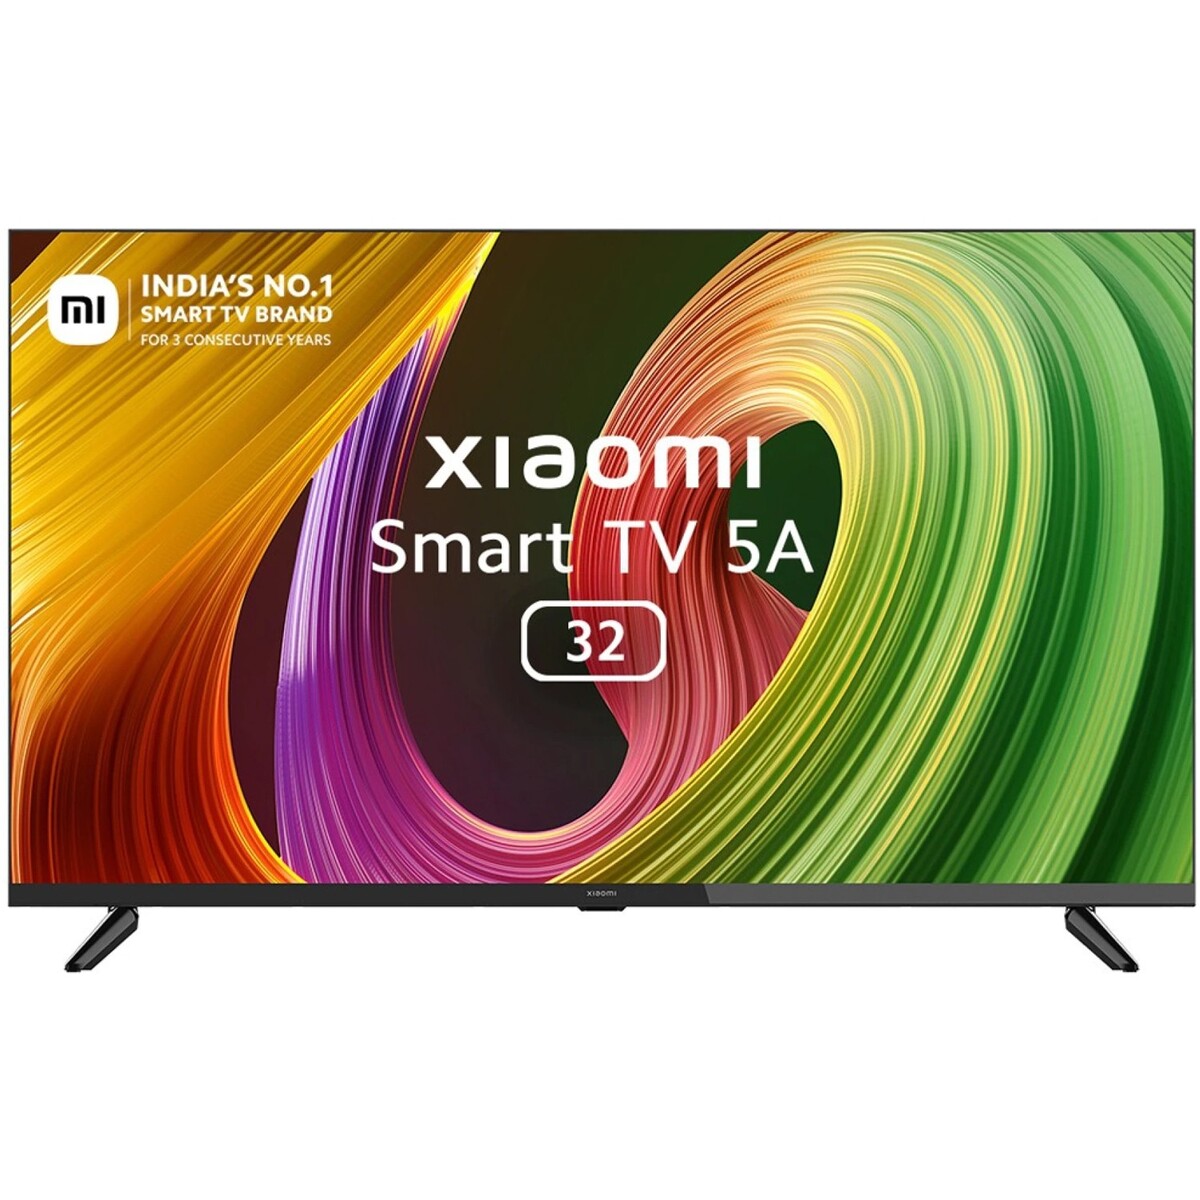 Xiaomi HD Ready LED Smart Android TV 5A 32"